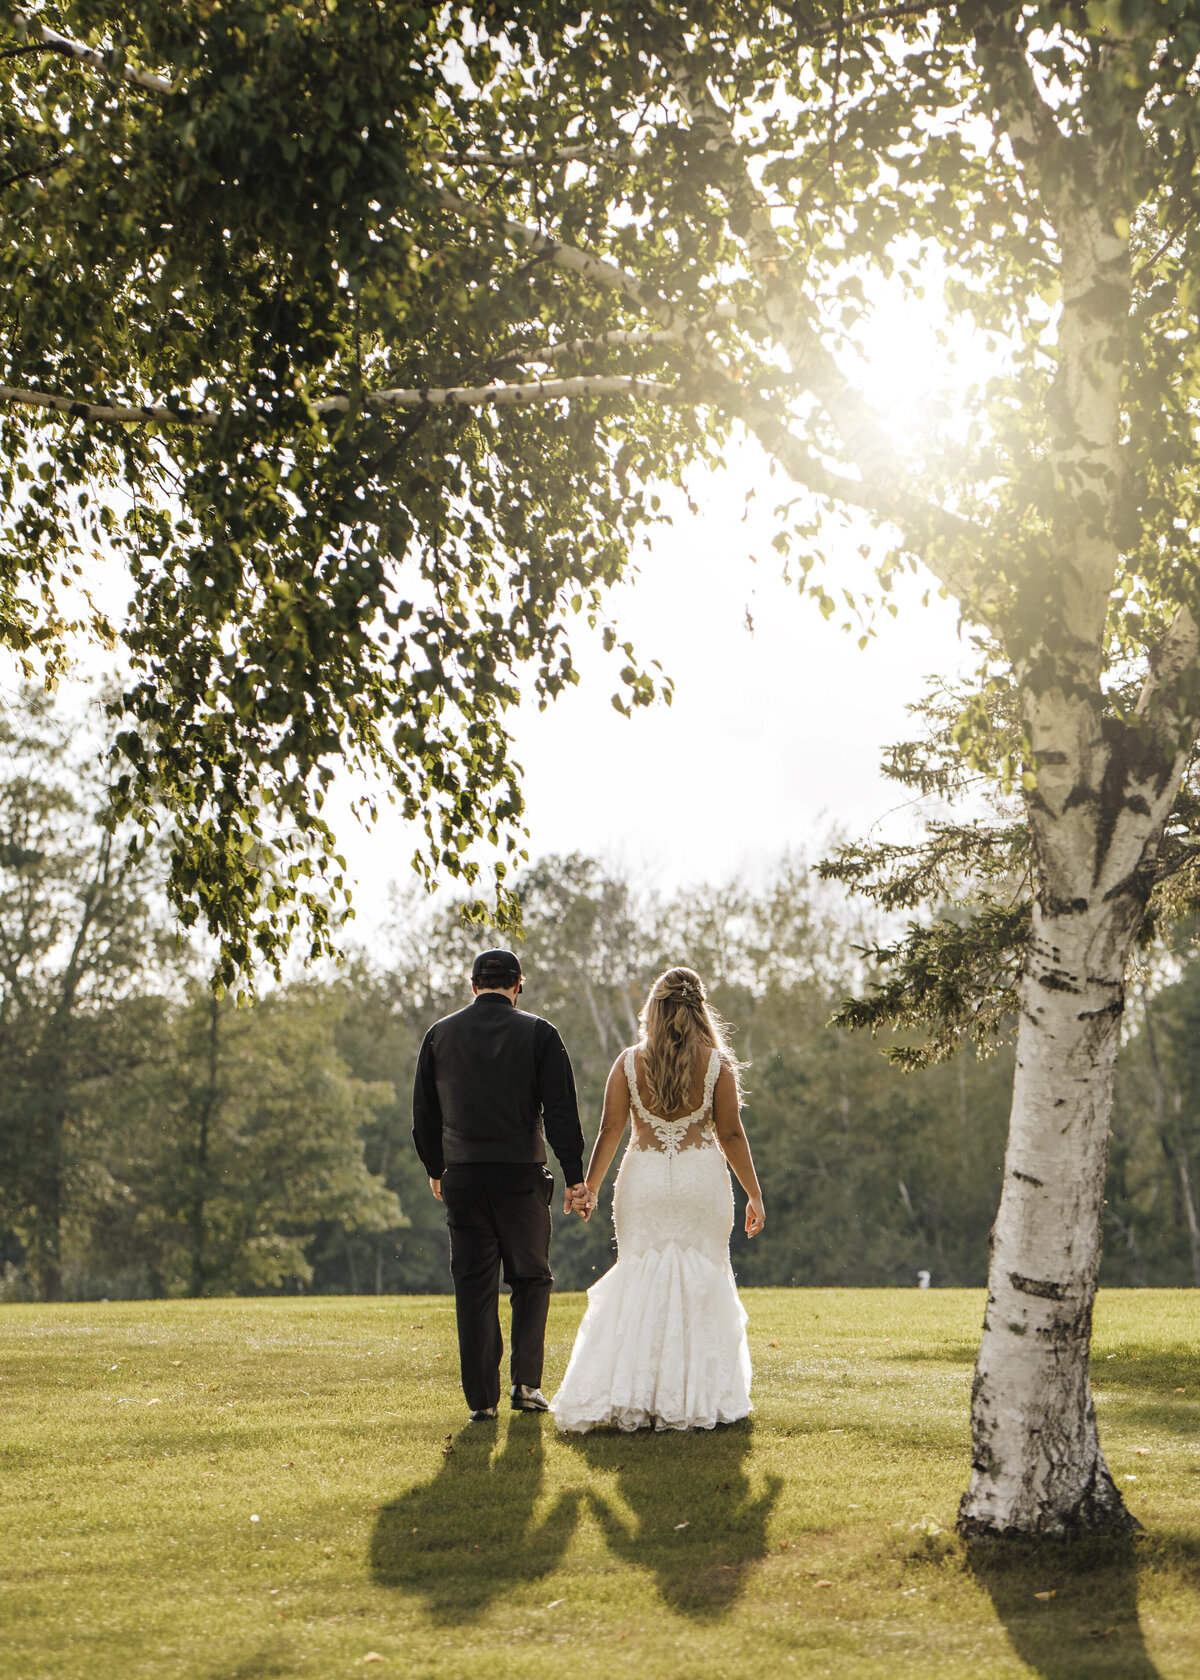 A couple holding hands, walking through a sunlit golf course, with the bride in a white dress and the groom in a dark suit, signifying a moment of togetherness and new beginnings taken by jen Jarmuzek photography a Minneapolis wedding photographer